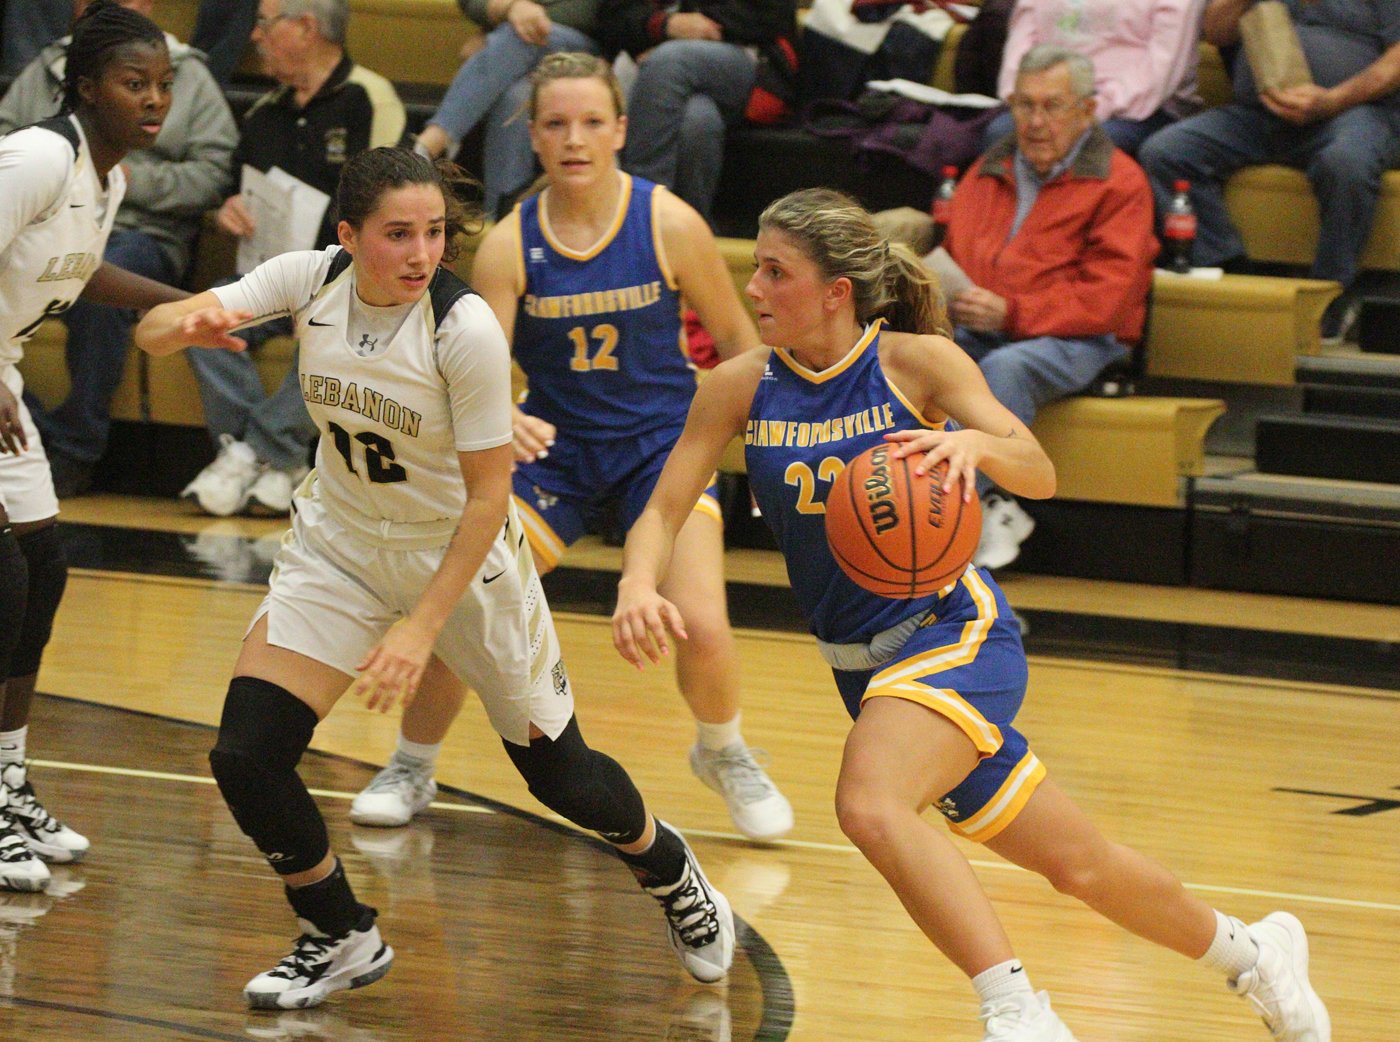 Shea Williamson led the girls with 11 point and 9 rebounds.